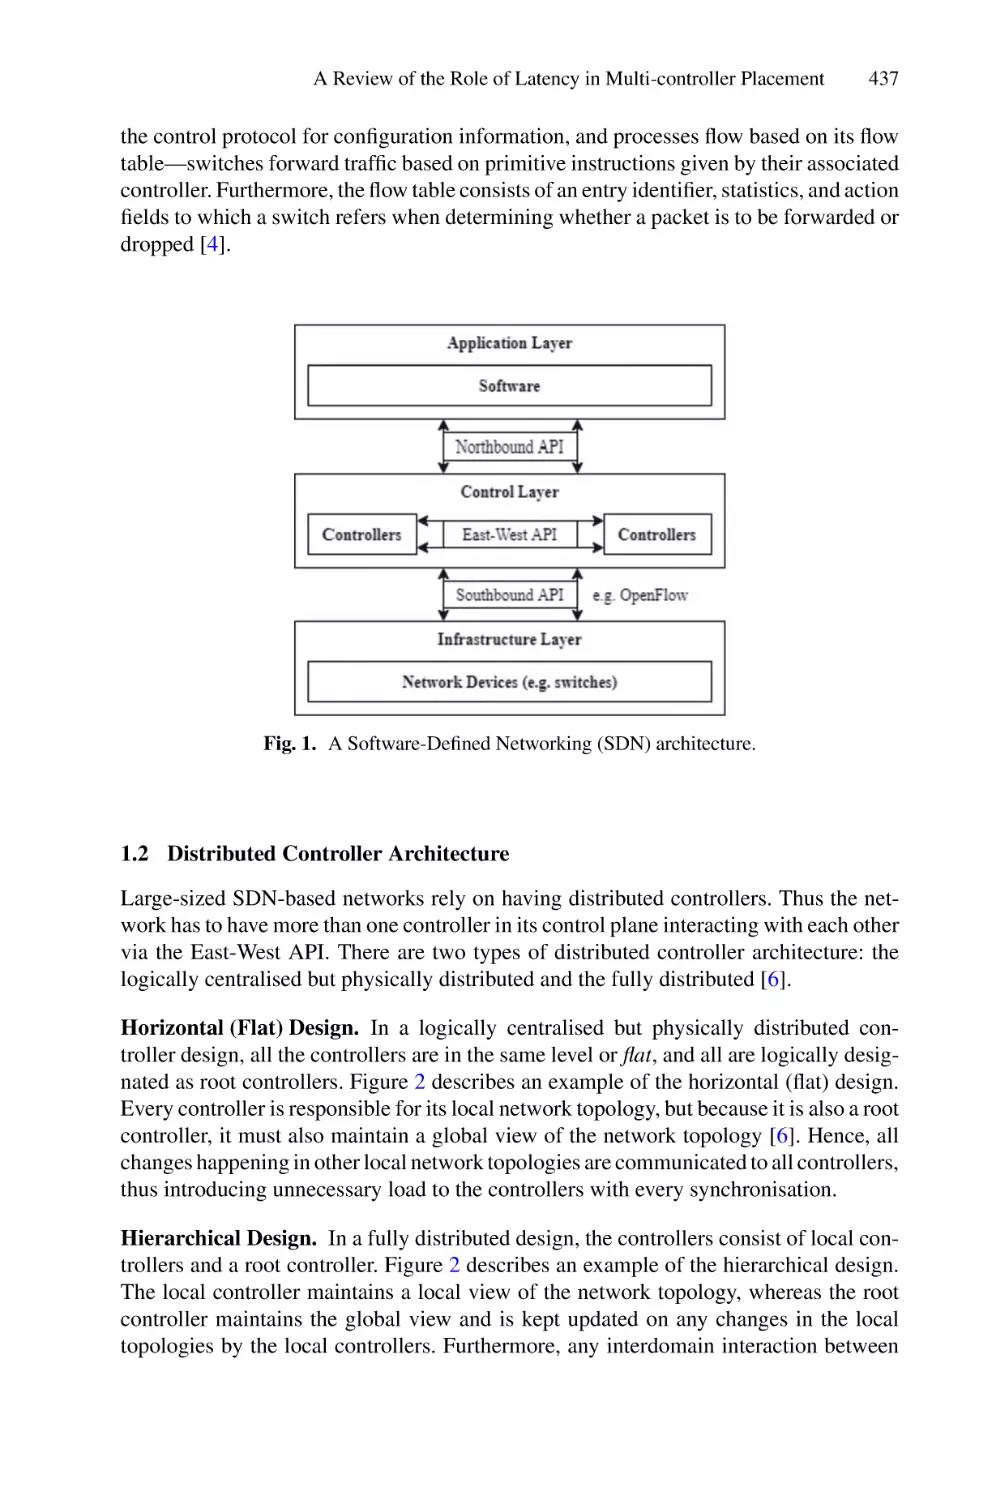 1.2 Distributed Controller Architecture